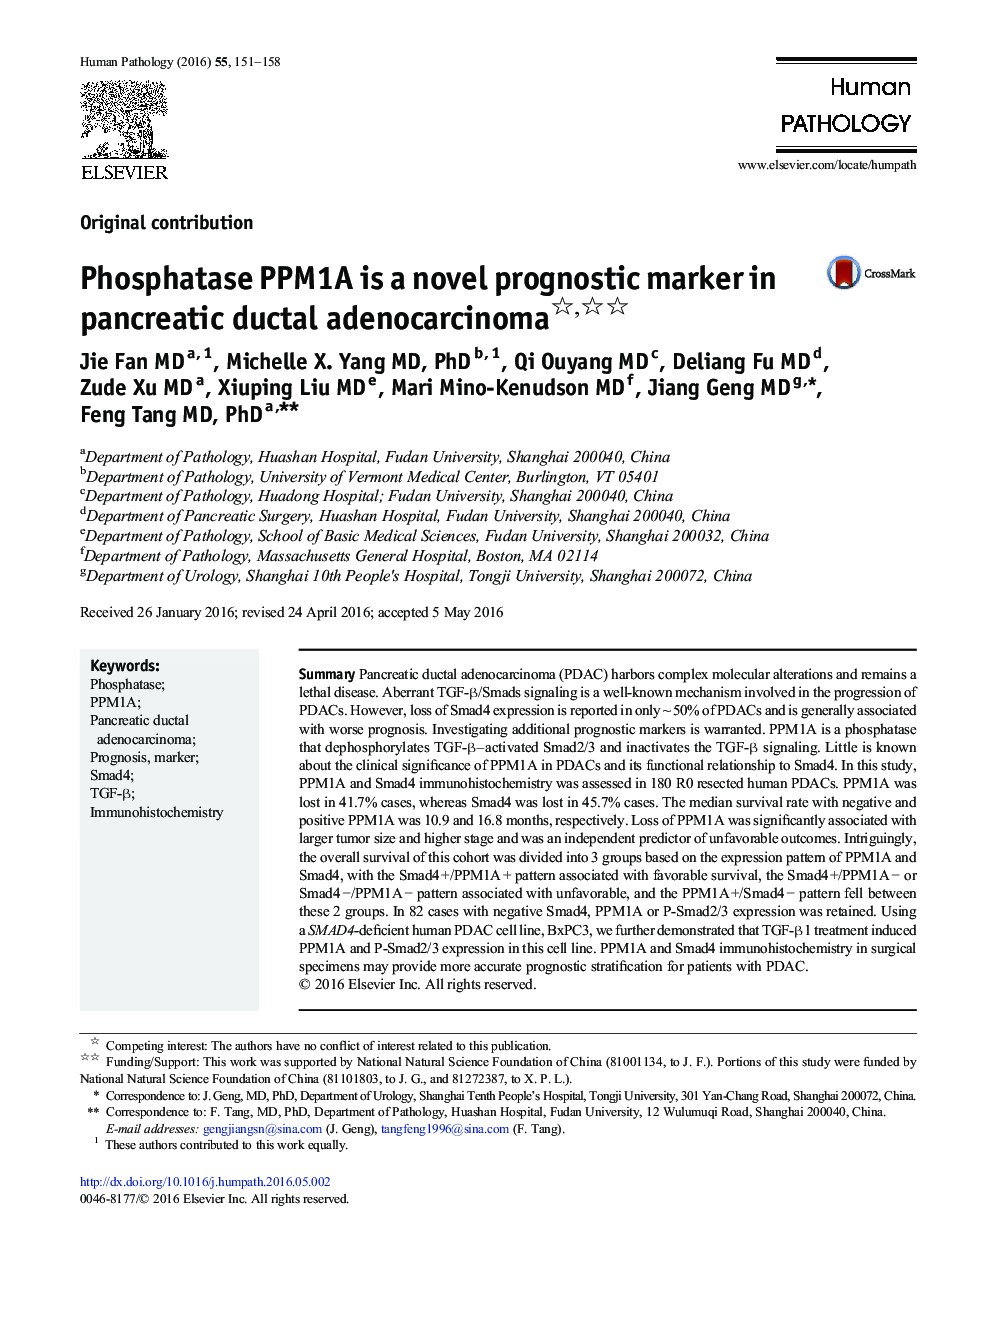 Phosphatase PPM1A is a novel prognostic marker in pancreatic ductal adenocarcinoma